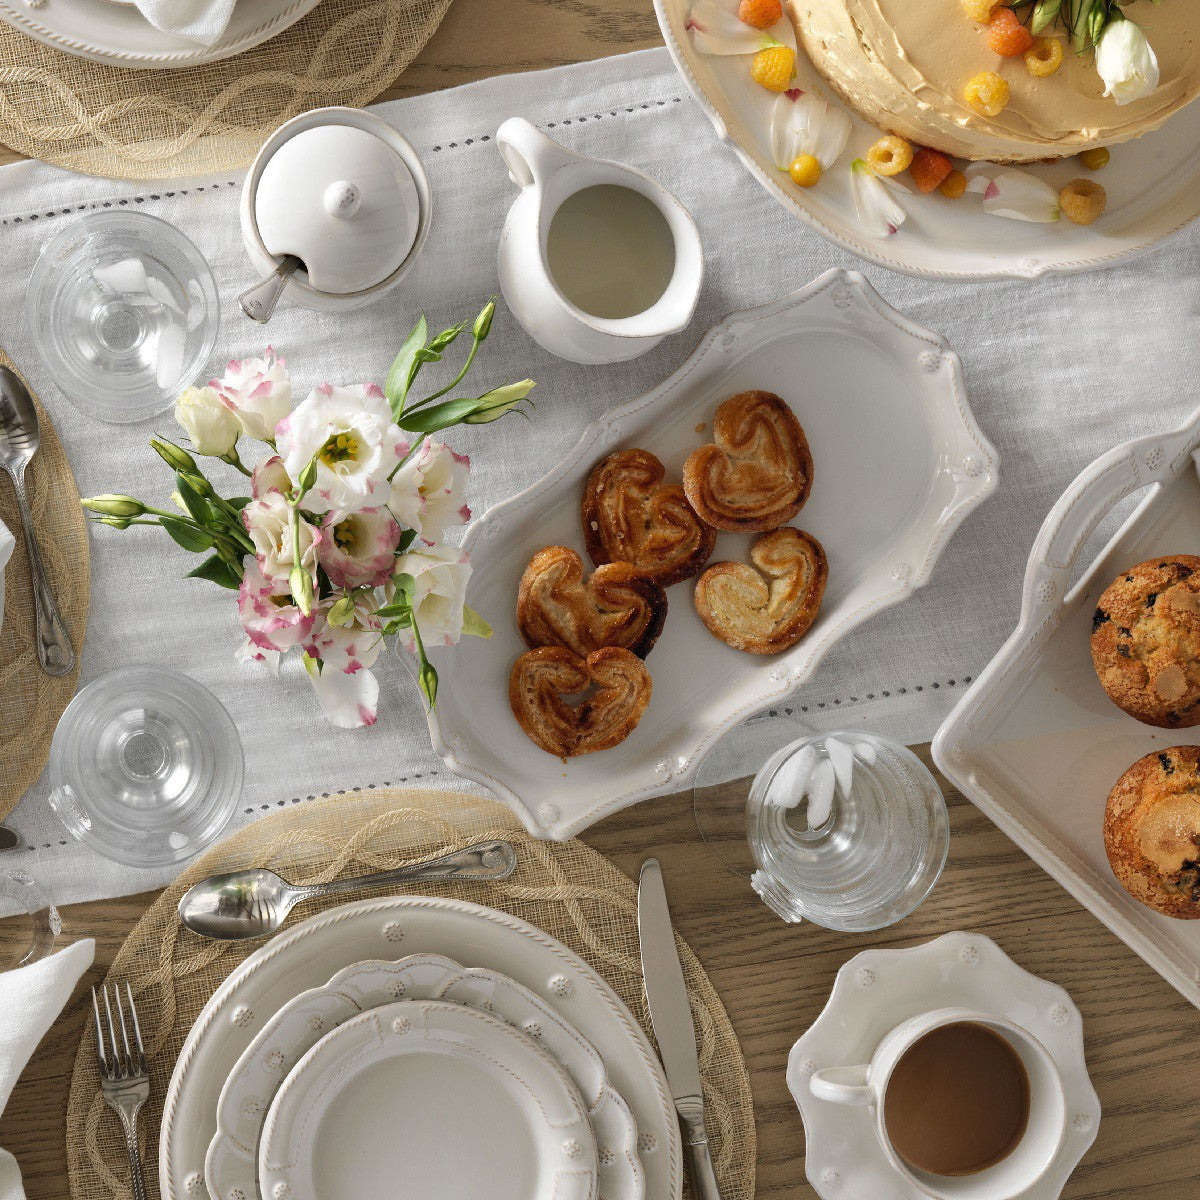 table setting with plates, glasses, coffee cup, cake stand on a wood table with a white table runner